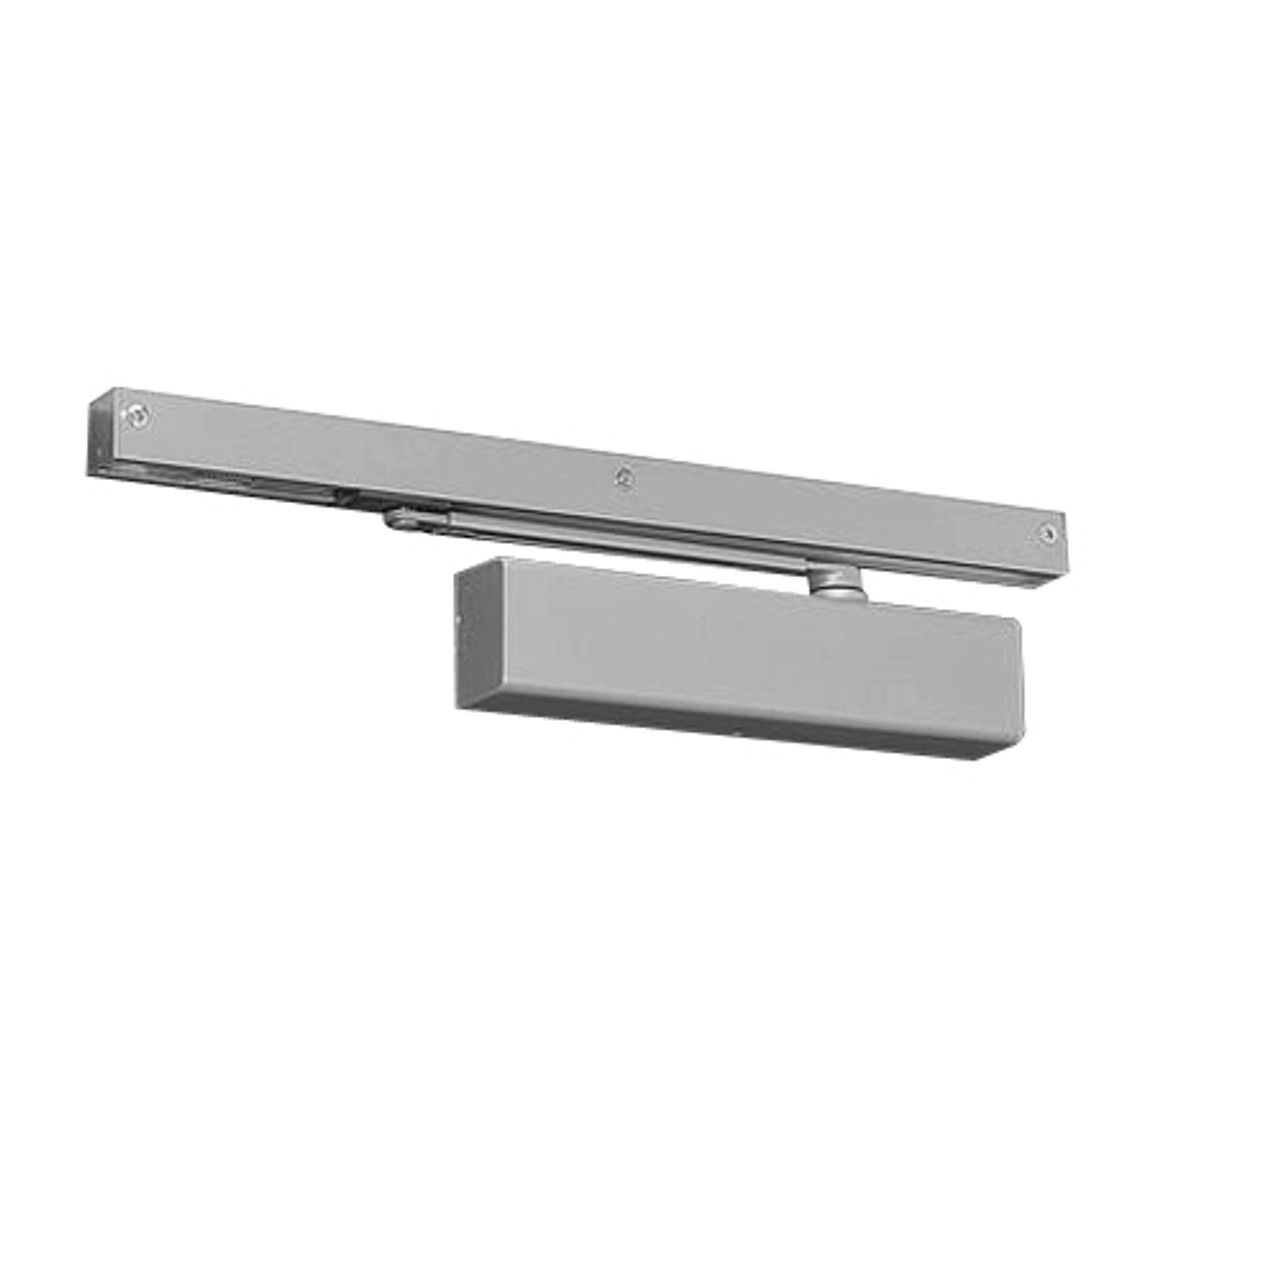 7500STM-689 Norton 7500 Series Non-Hold Open Institutional Door Closer with Pull Side Slide Track in Aluminum Finish